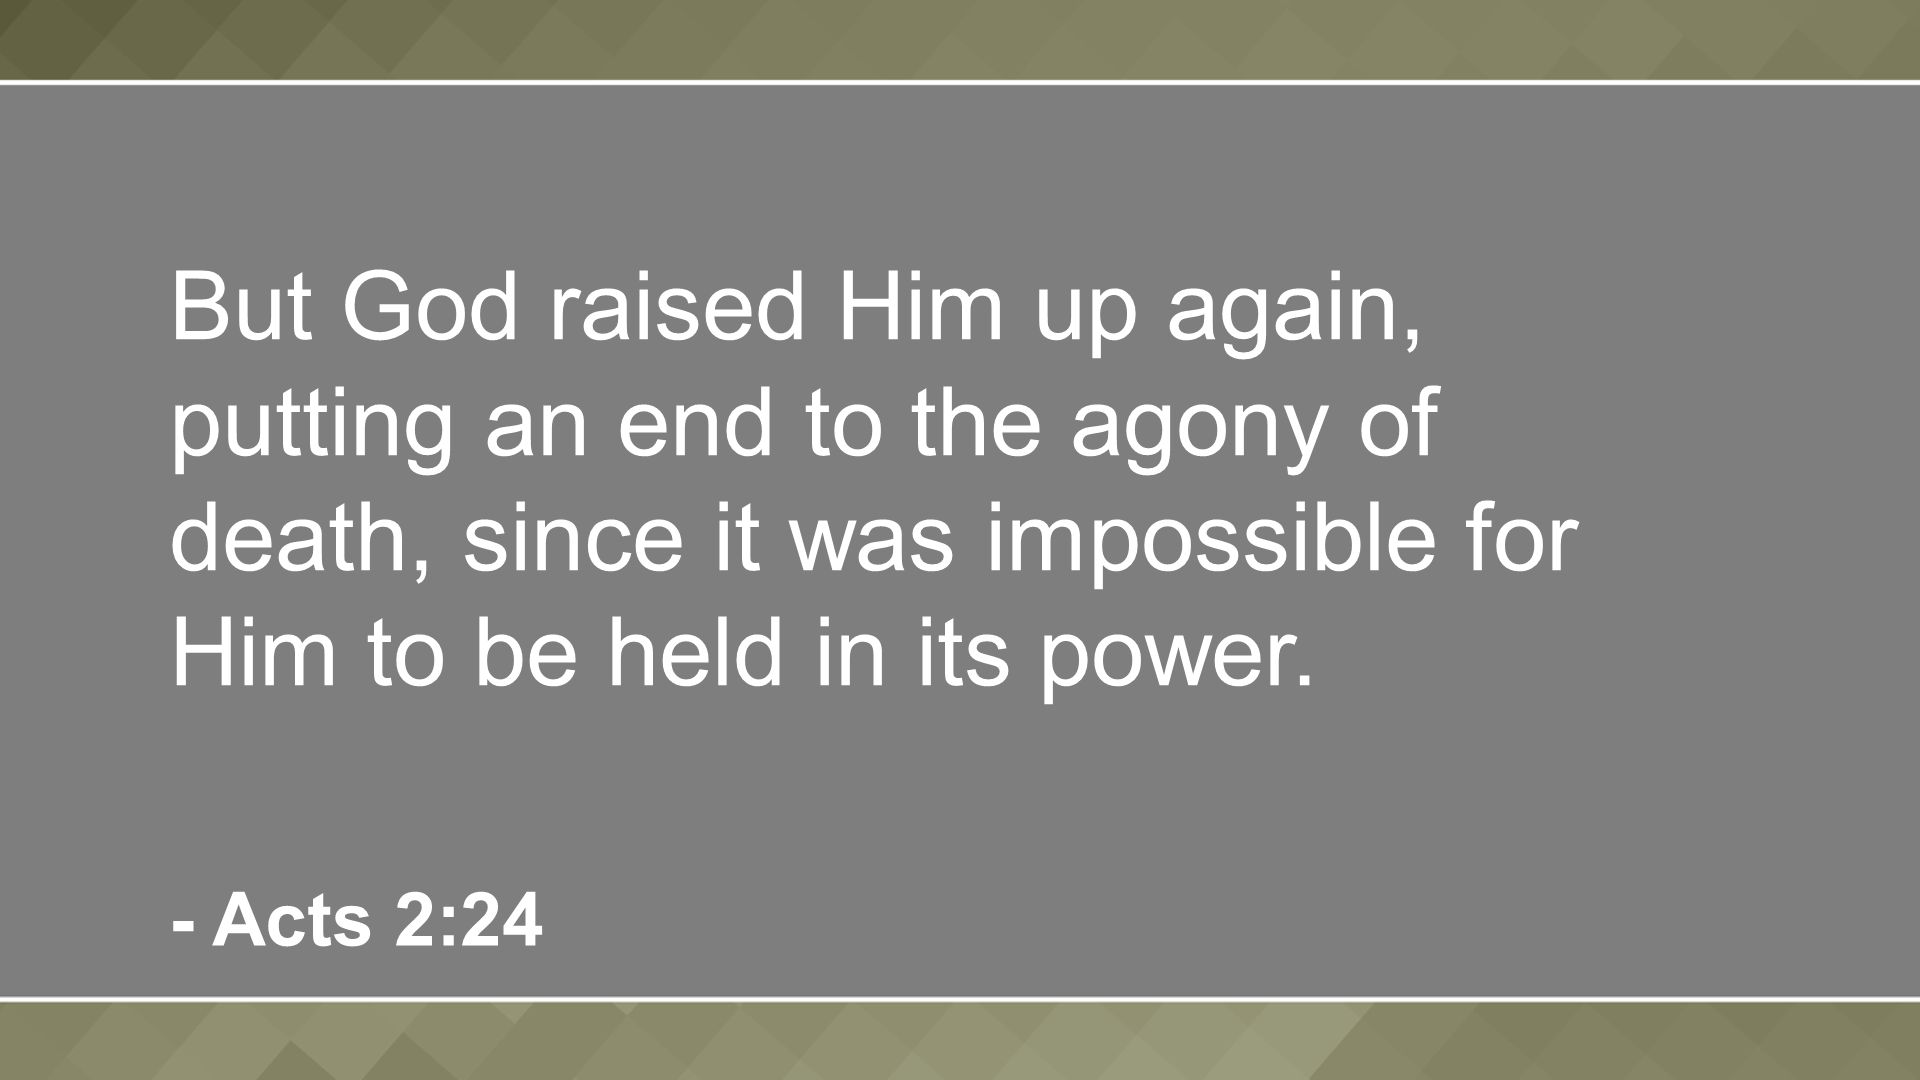 But God raised Him up again, putting an end to the agony of death, since it was impossible for Him to be held in its power.